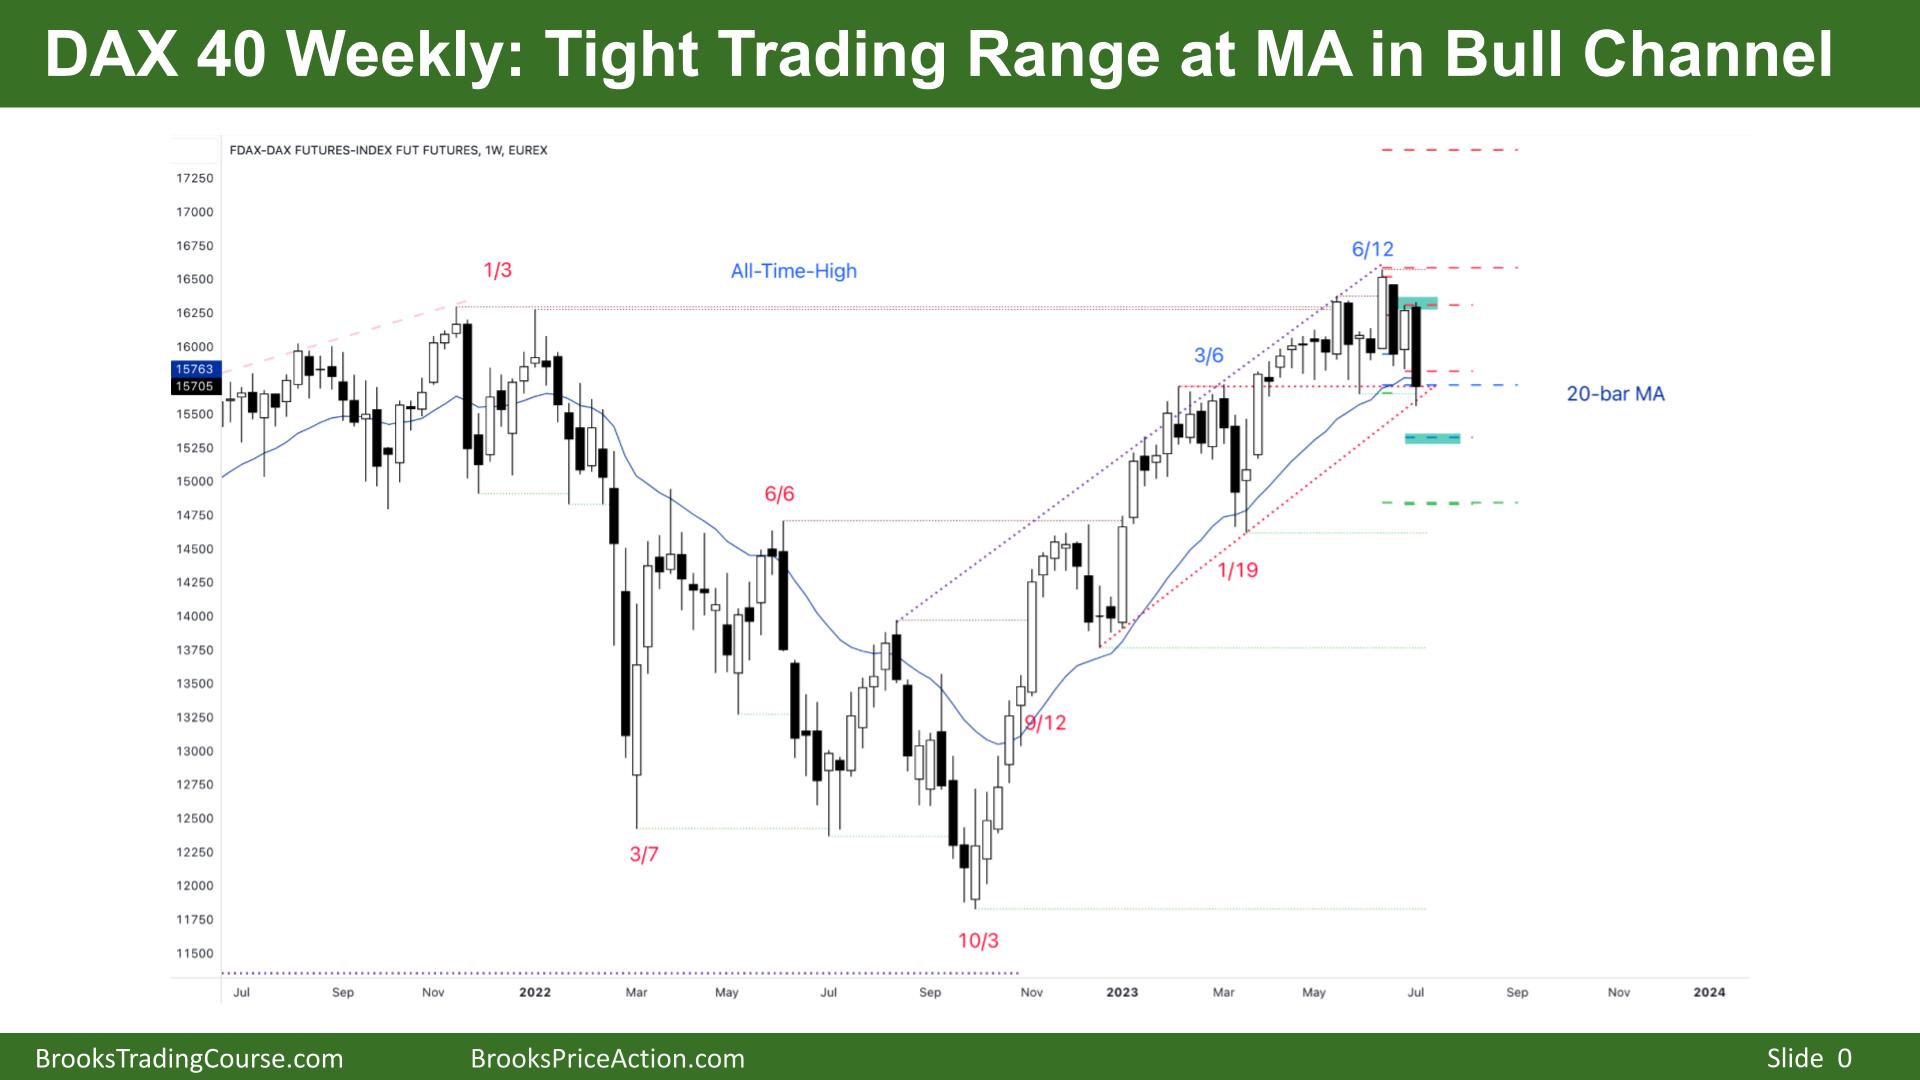 DAX 40 Tight Trading Range at MA in Bull Channel